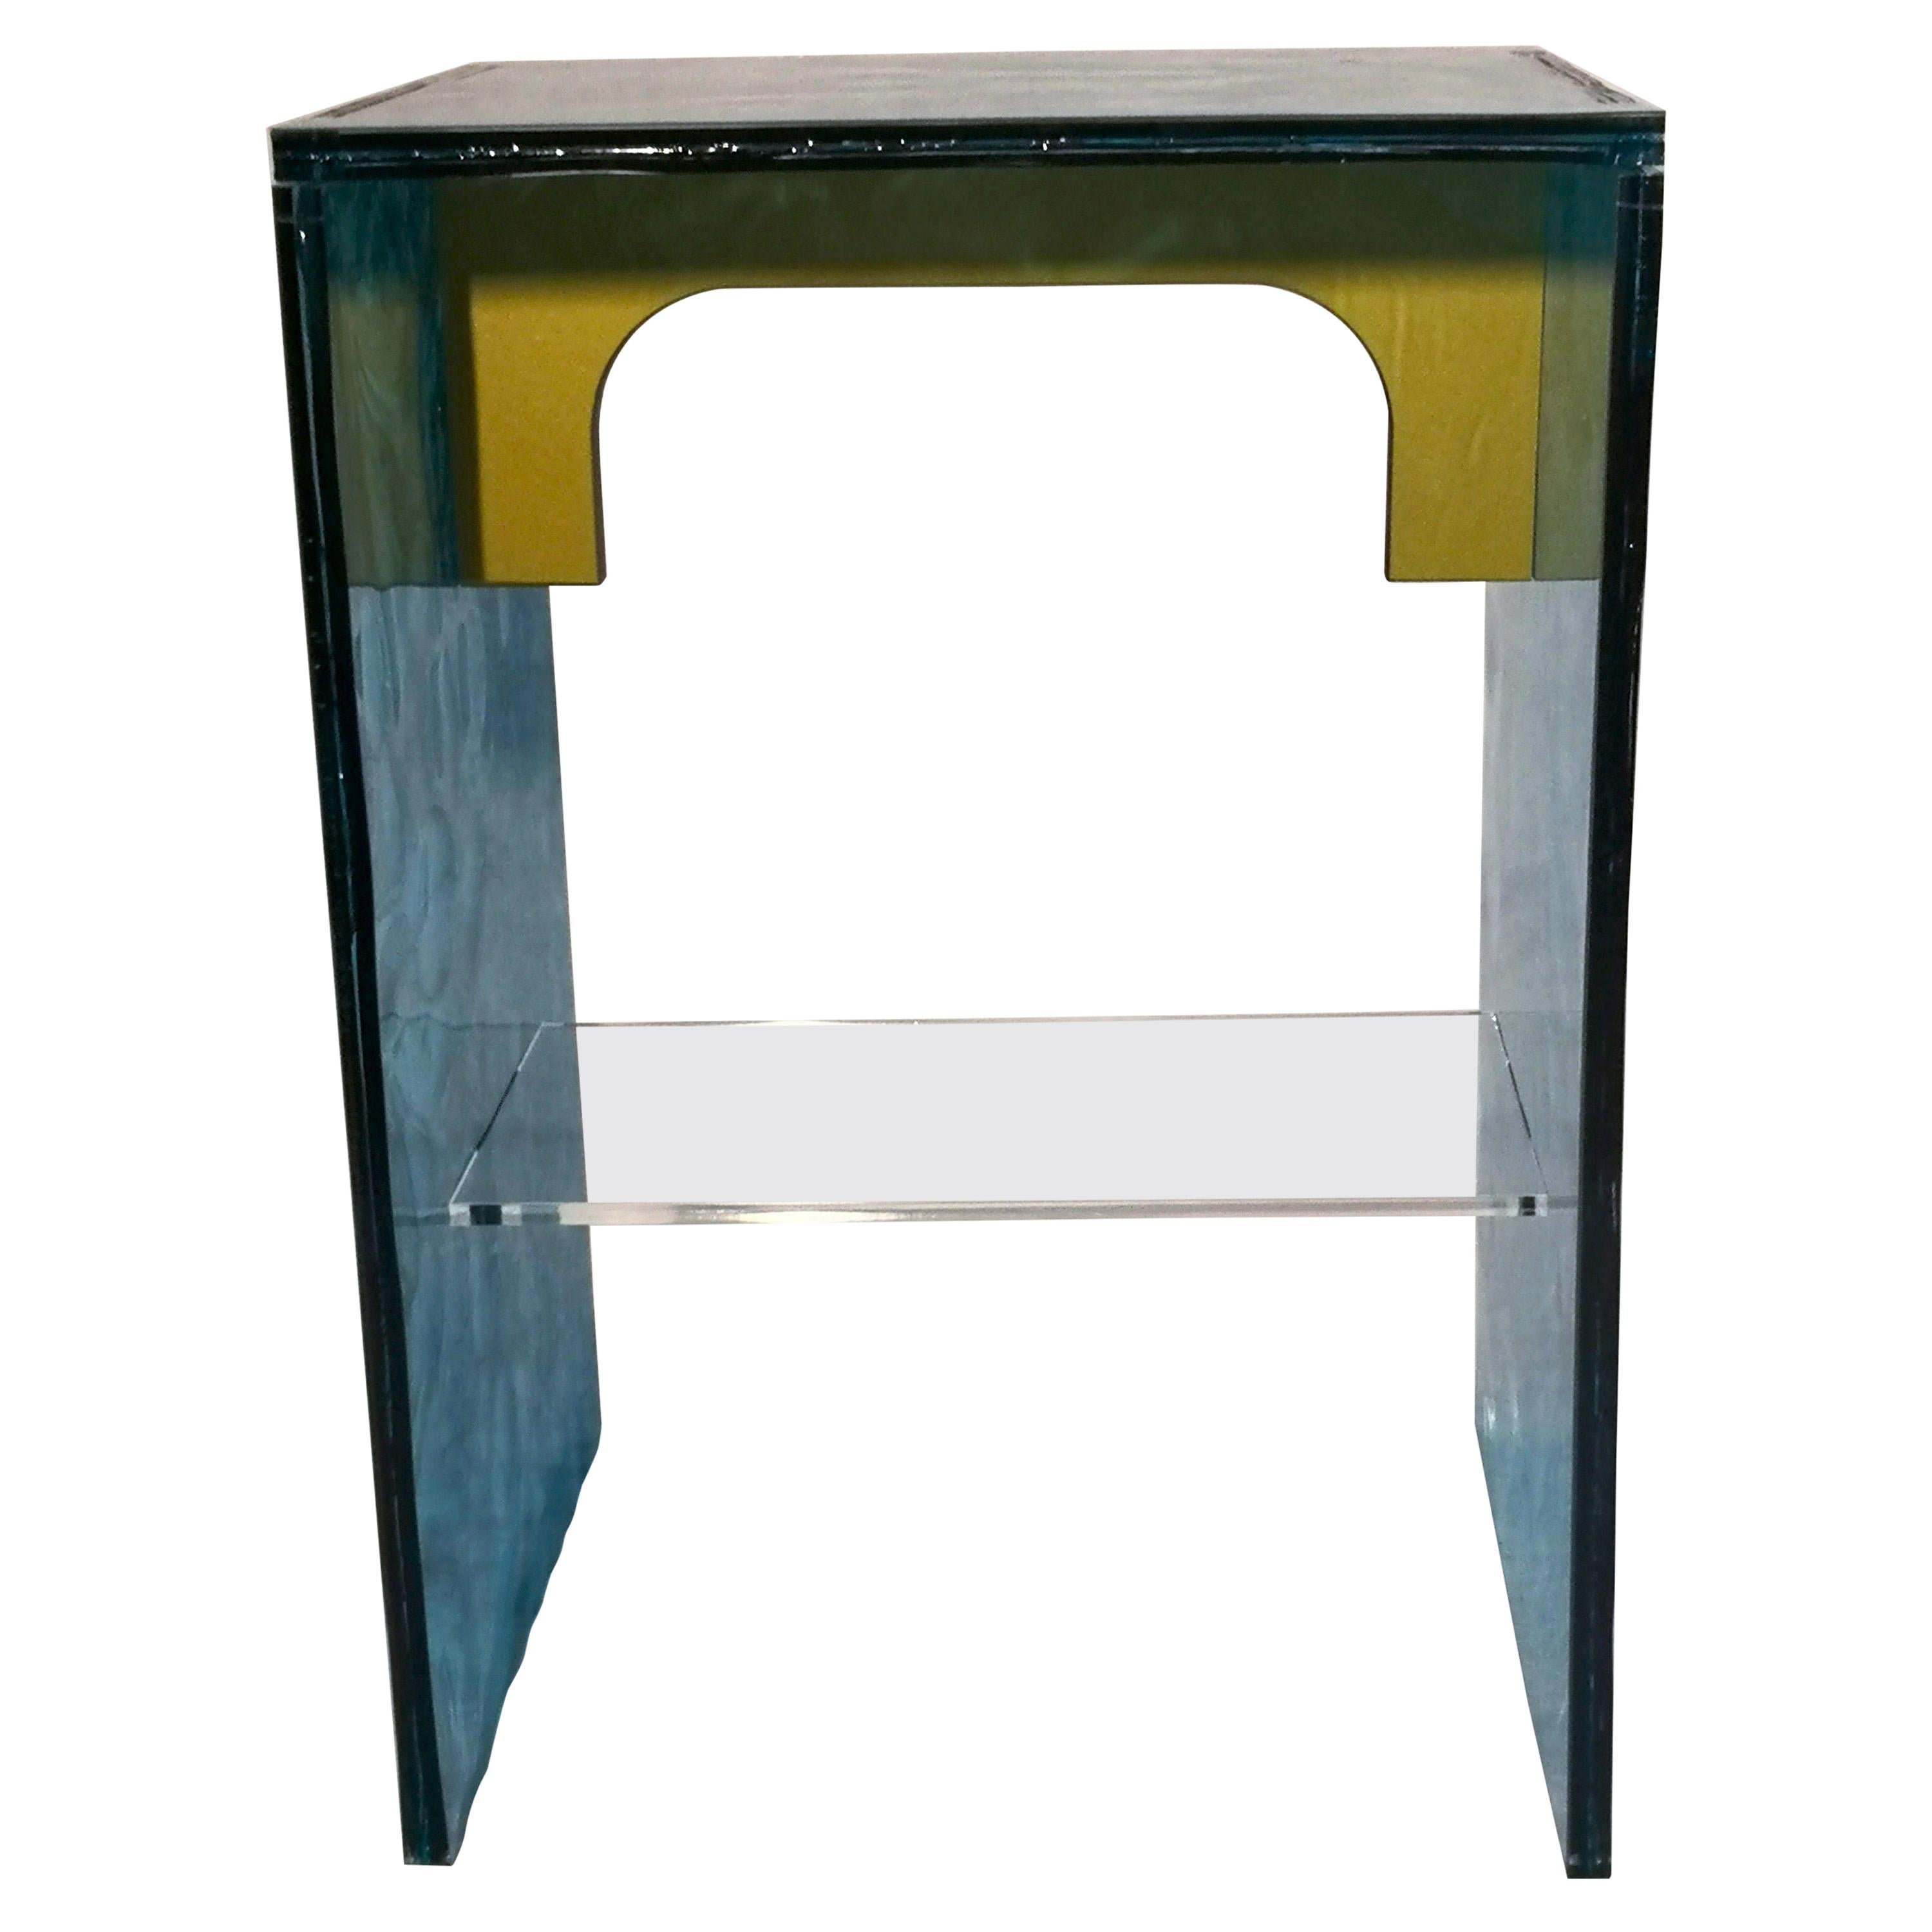 Sketch Quadro Side Table 2 Made of Green Acrylic Des. Roberto Giacomucci in 2020 For Sale